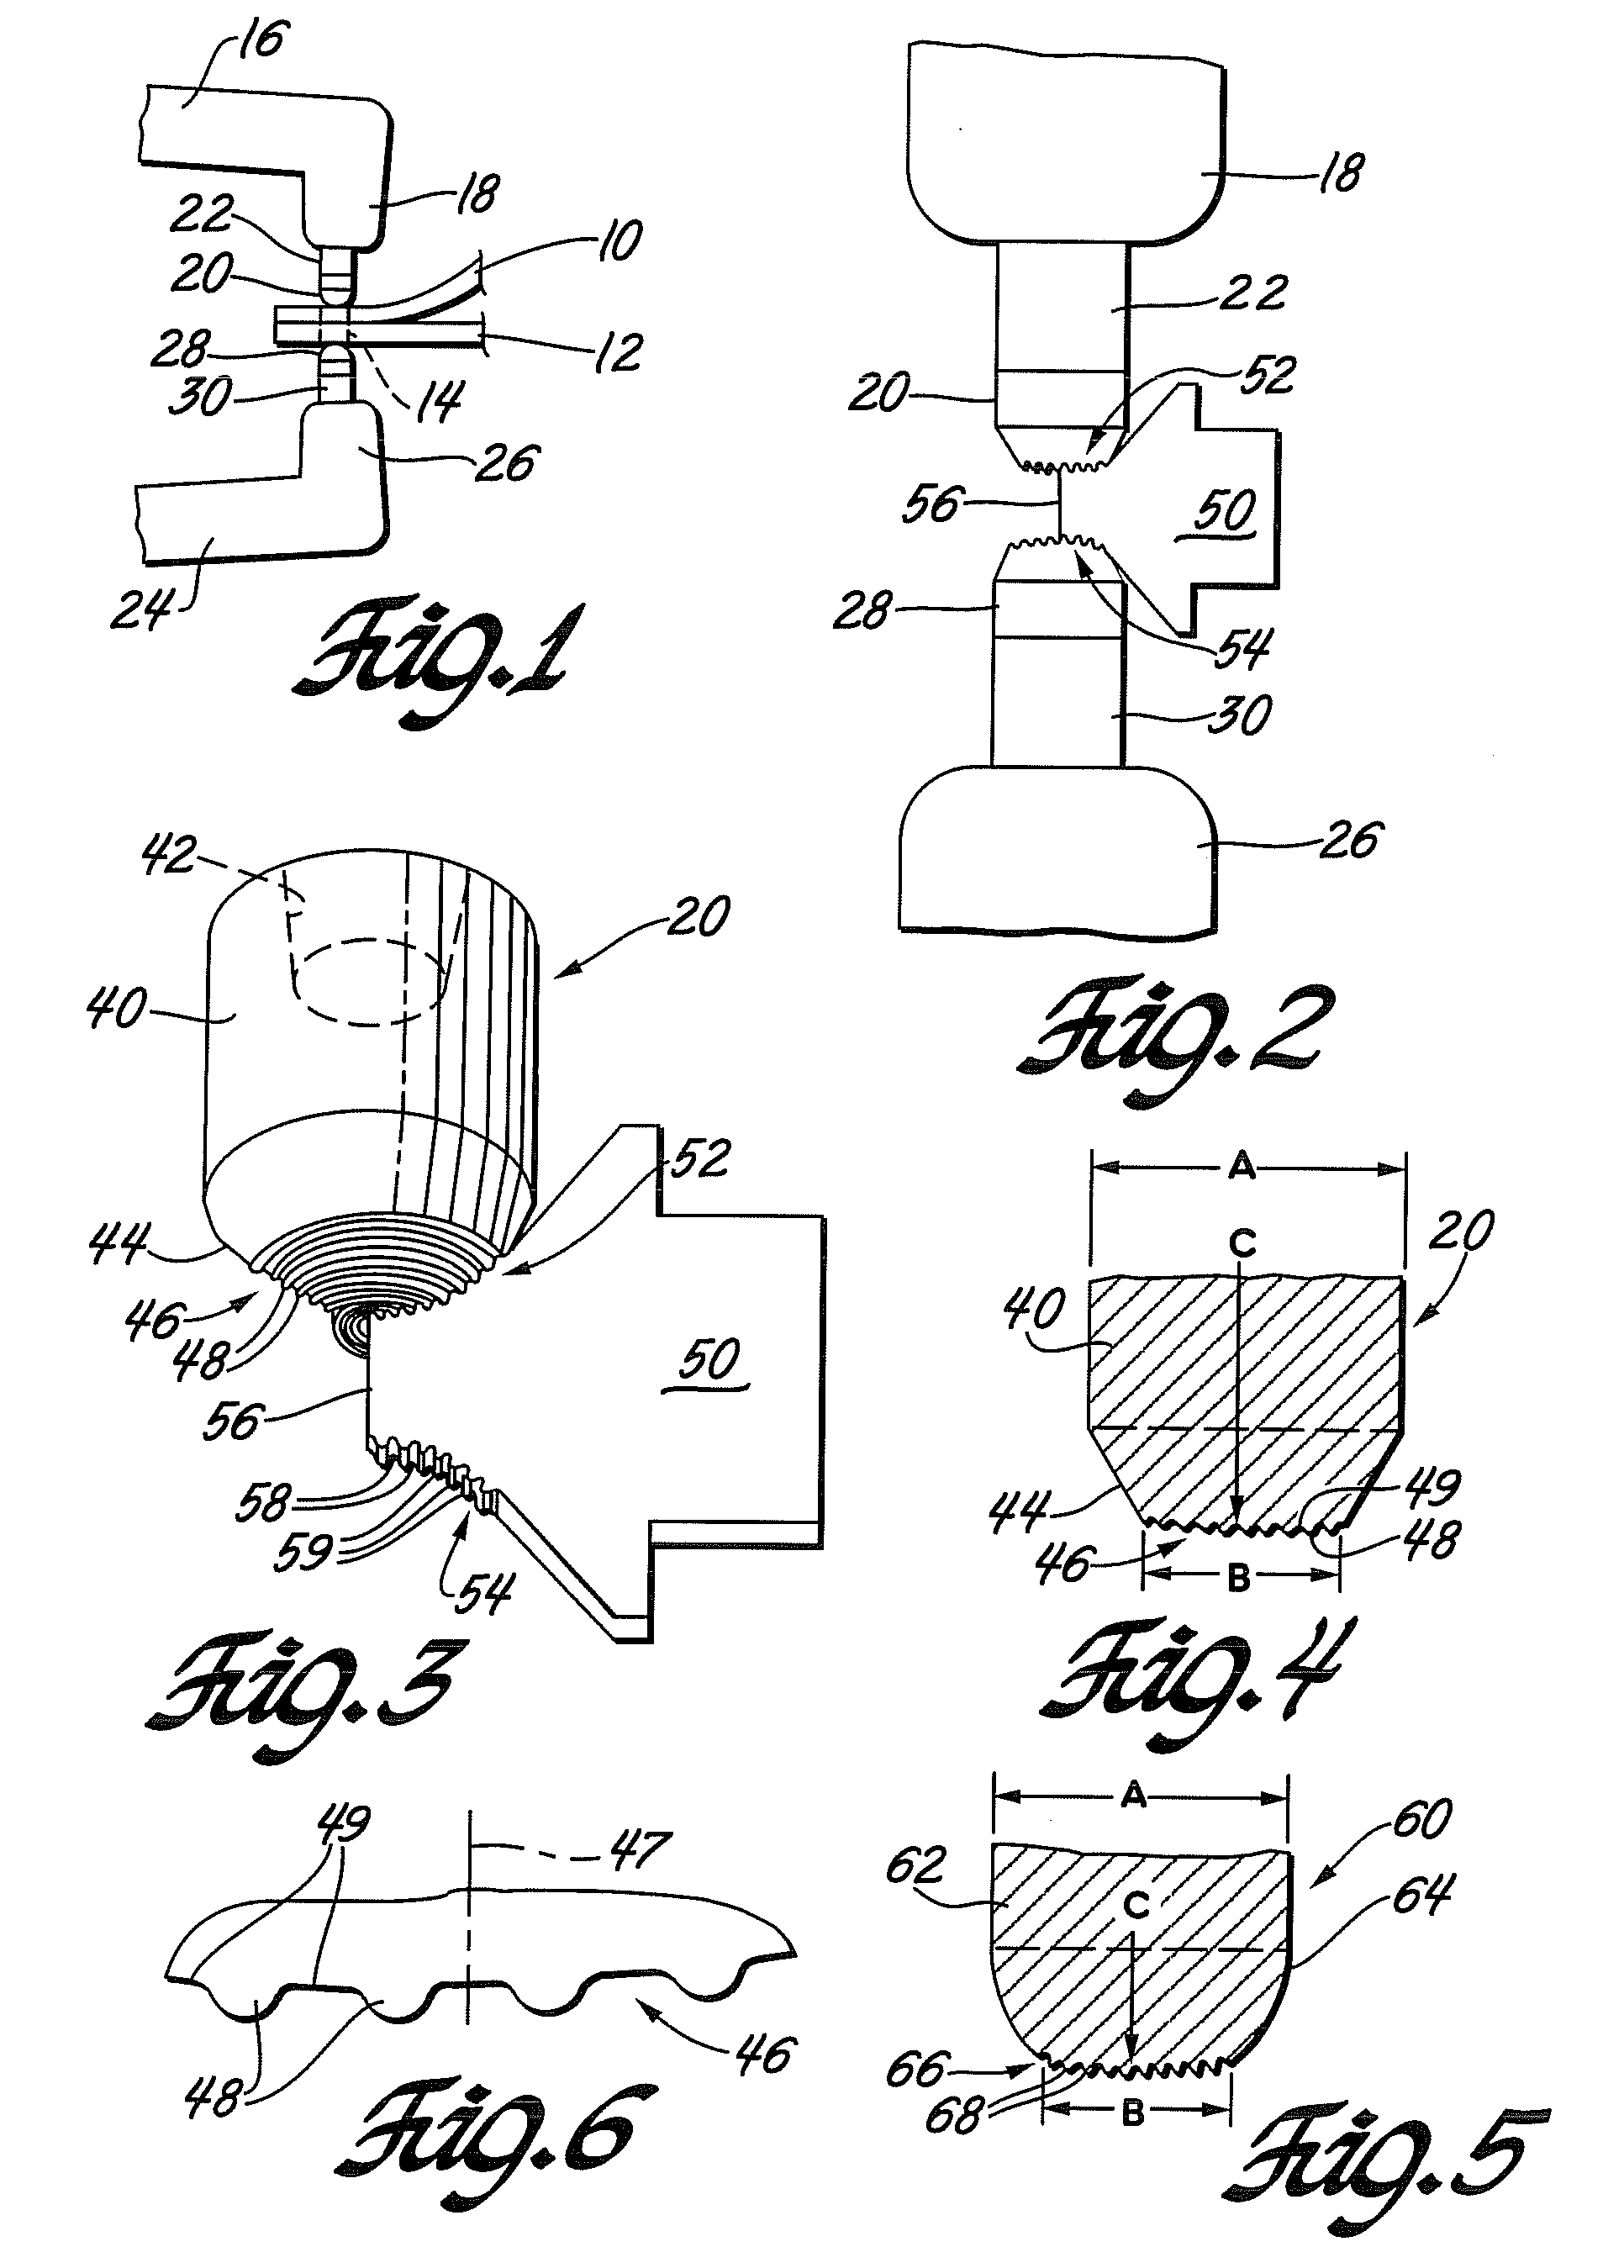 Forming and re-forming welding electrodes with contoured faces